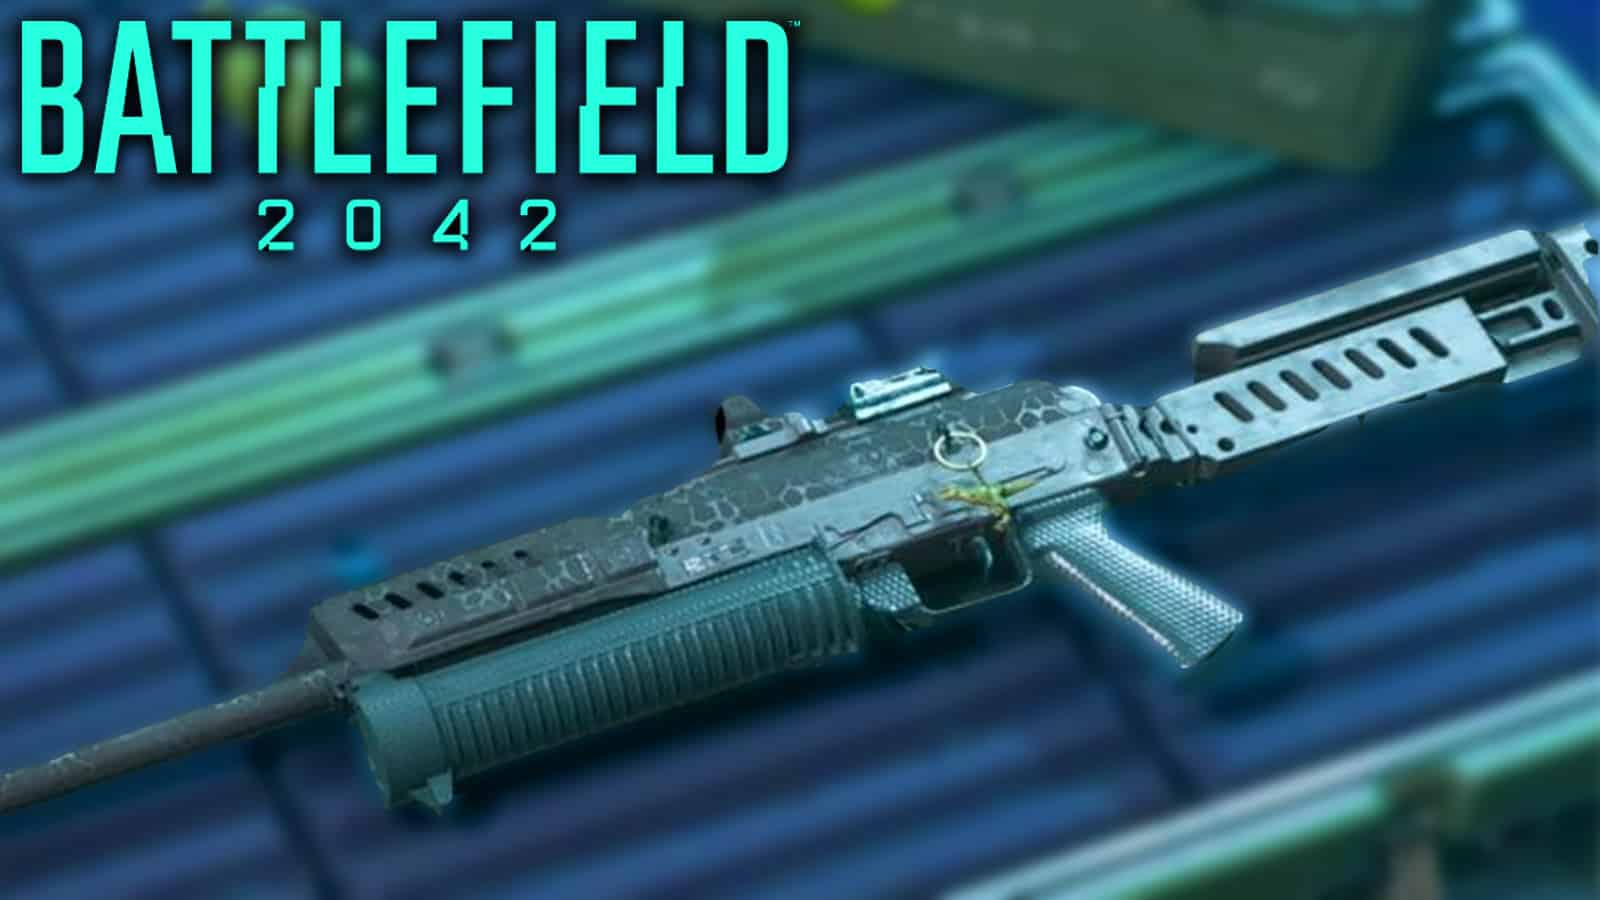 An image of the PP-29 from Battlefield 2042.